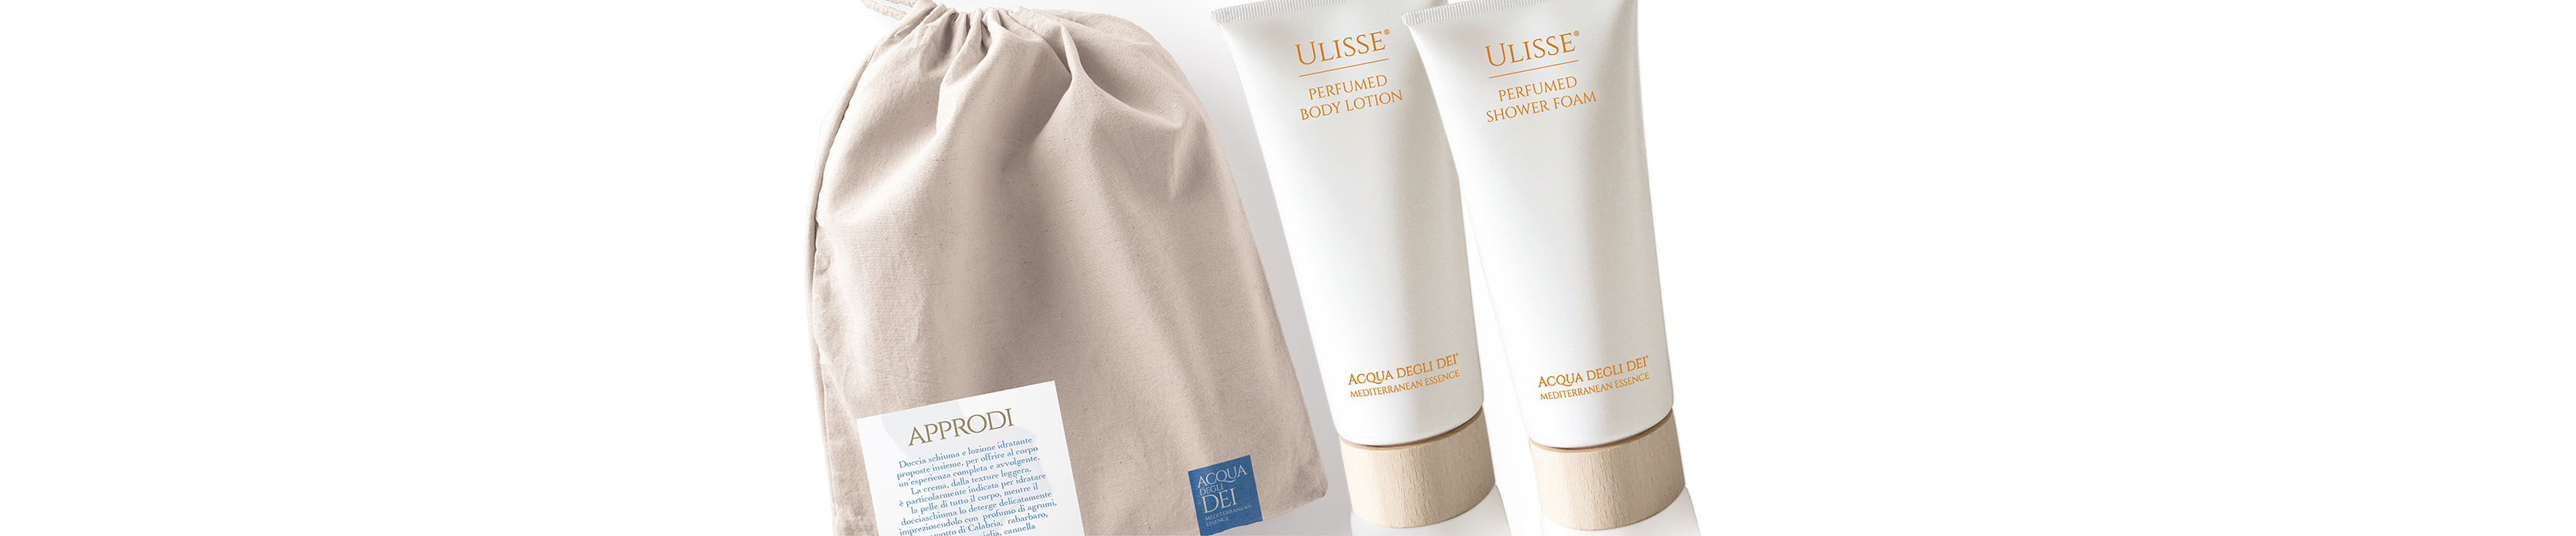 Landings: shower foam and hydrating lotion proposed together, to offer the body a complete and enveloping experience.